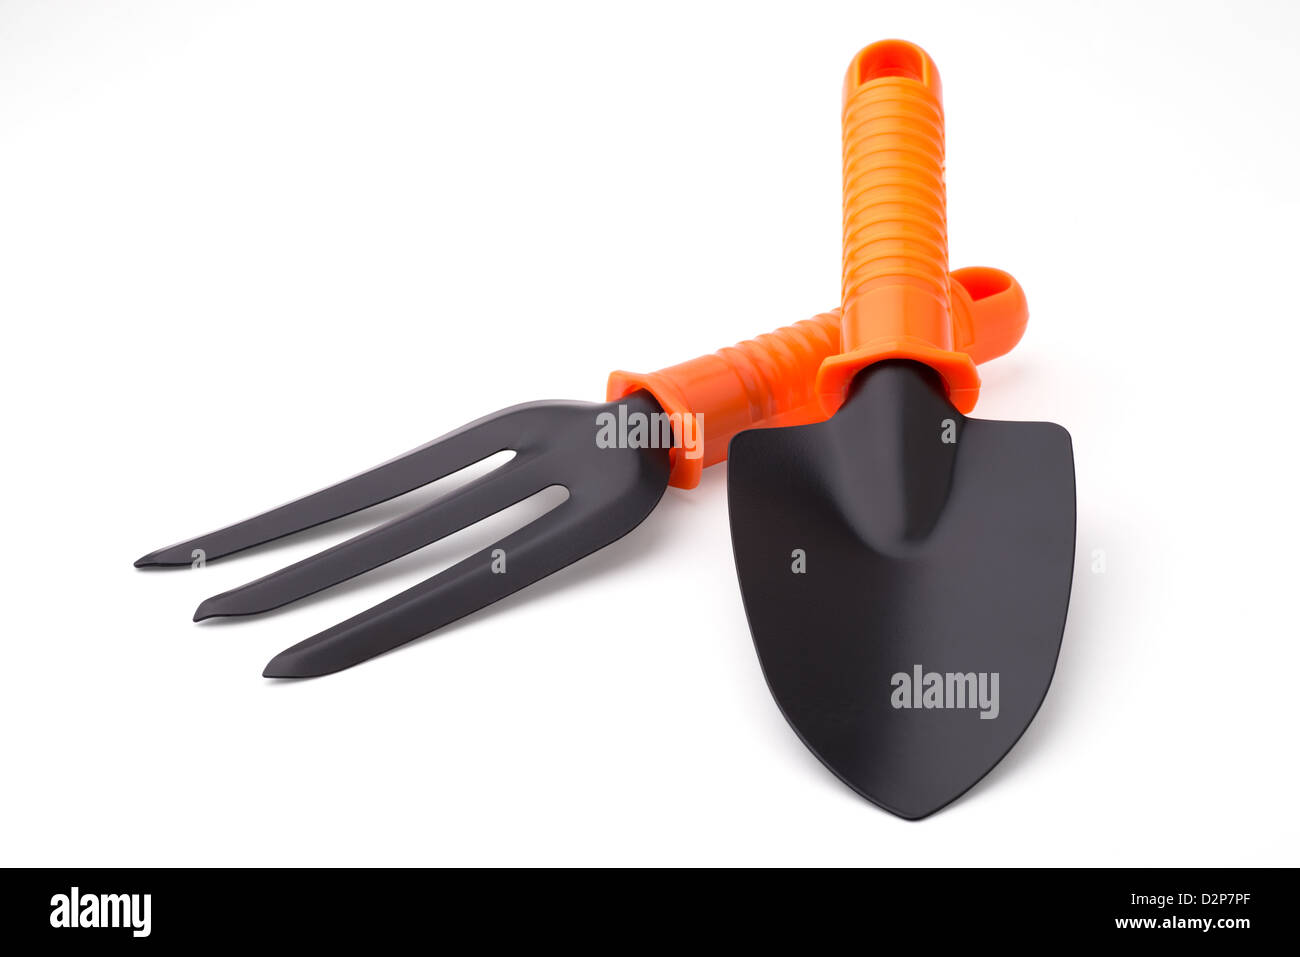 Gardening: trowel and digging fork, isolated on white background Stock Photo